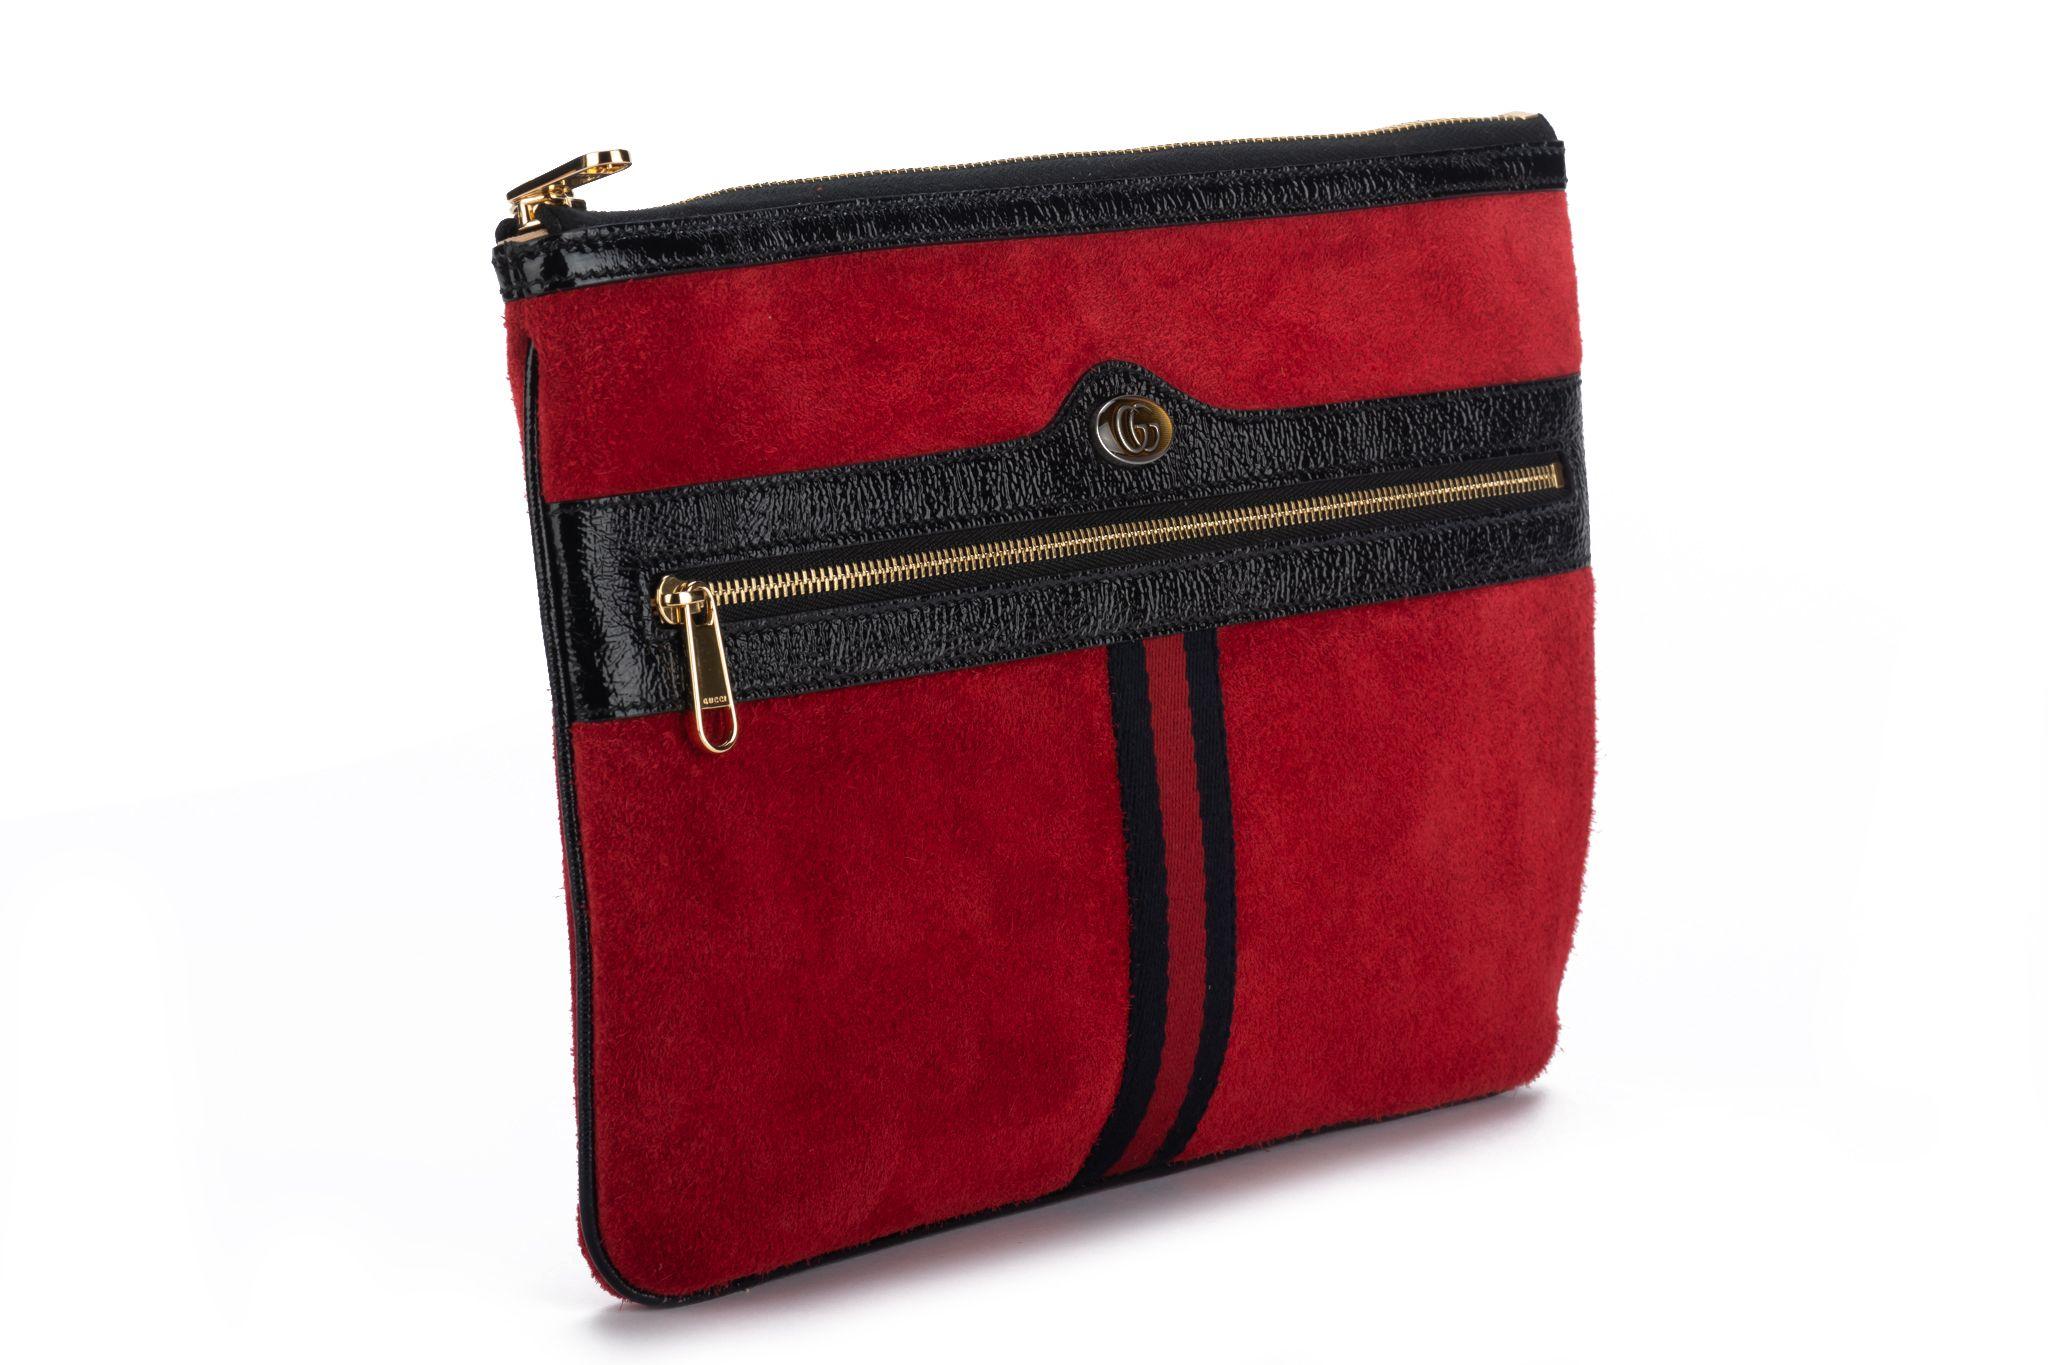 Gucci brand new red suede and black patent leather clutch with gold hardware. Outer zipped pocket and top zipper. Comes with original dust cover.